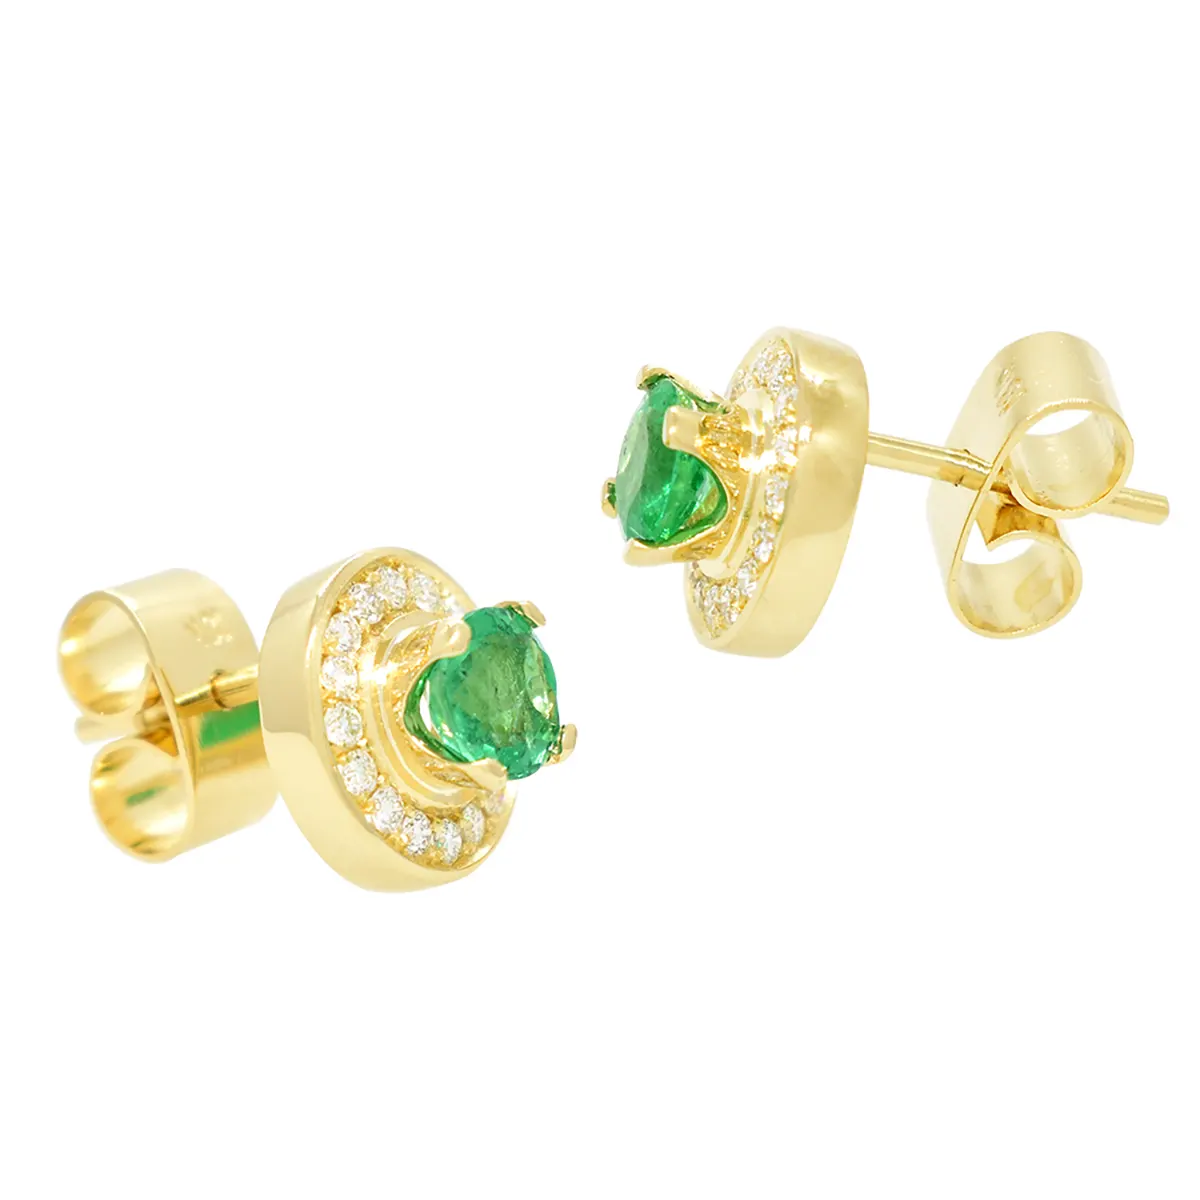 This entire set of emerald and diamond circular earrings are handcrafted especially for these 2 round-cut emeralds in 0.65 Ct. t.w. and 32 brilliant cut diamonds in 0.19 Ct. t.w.